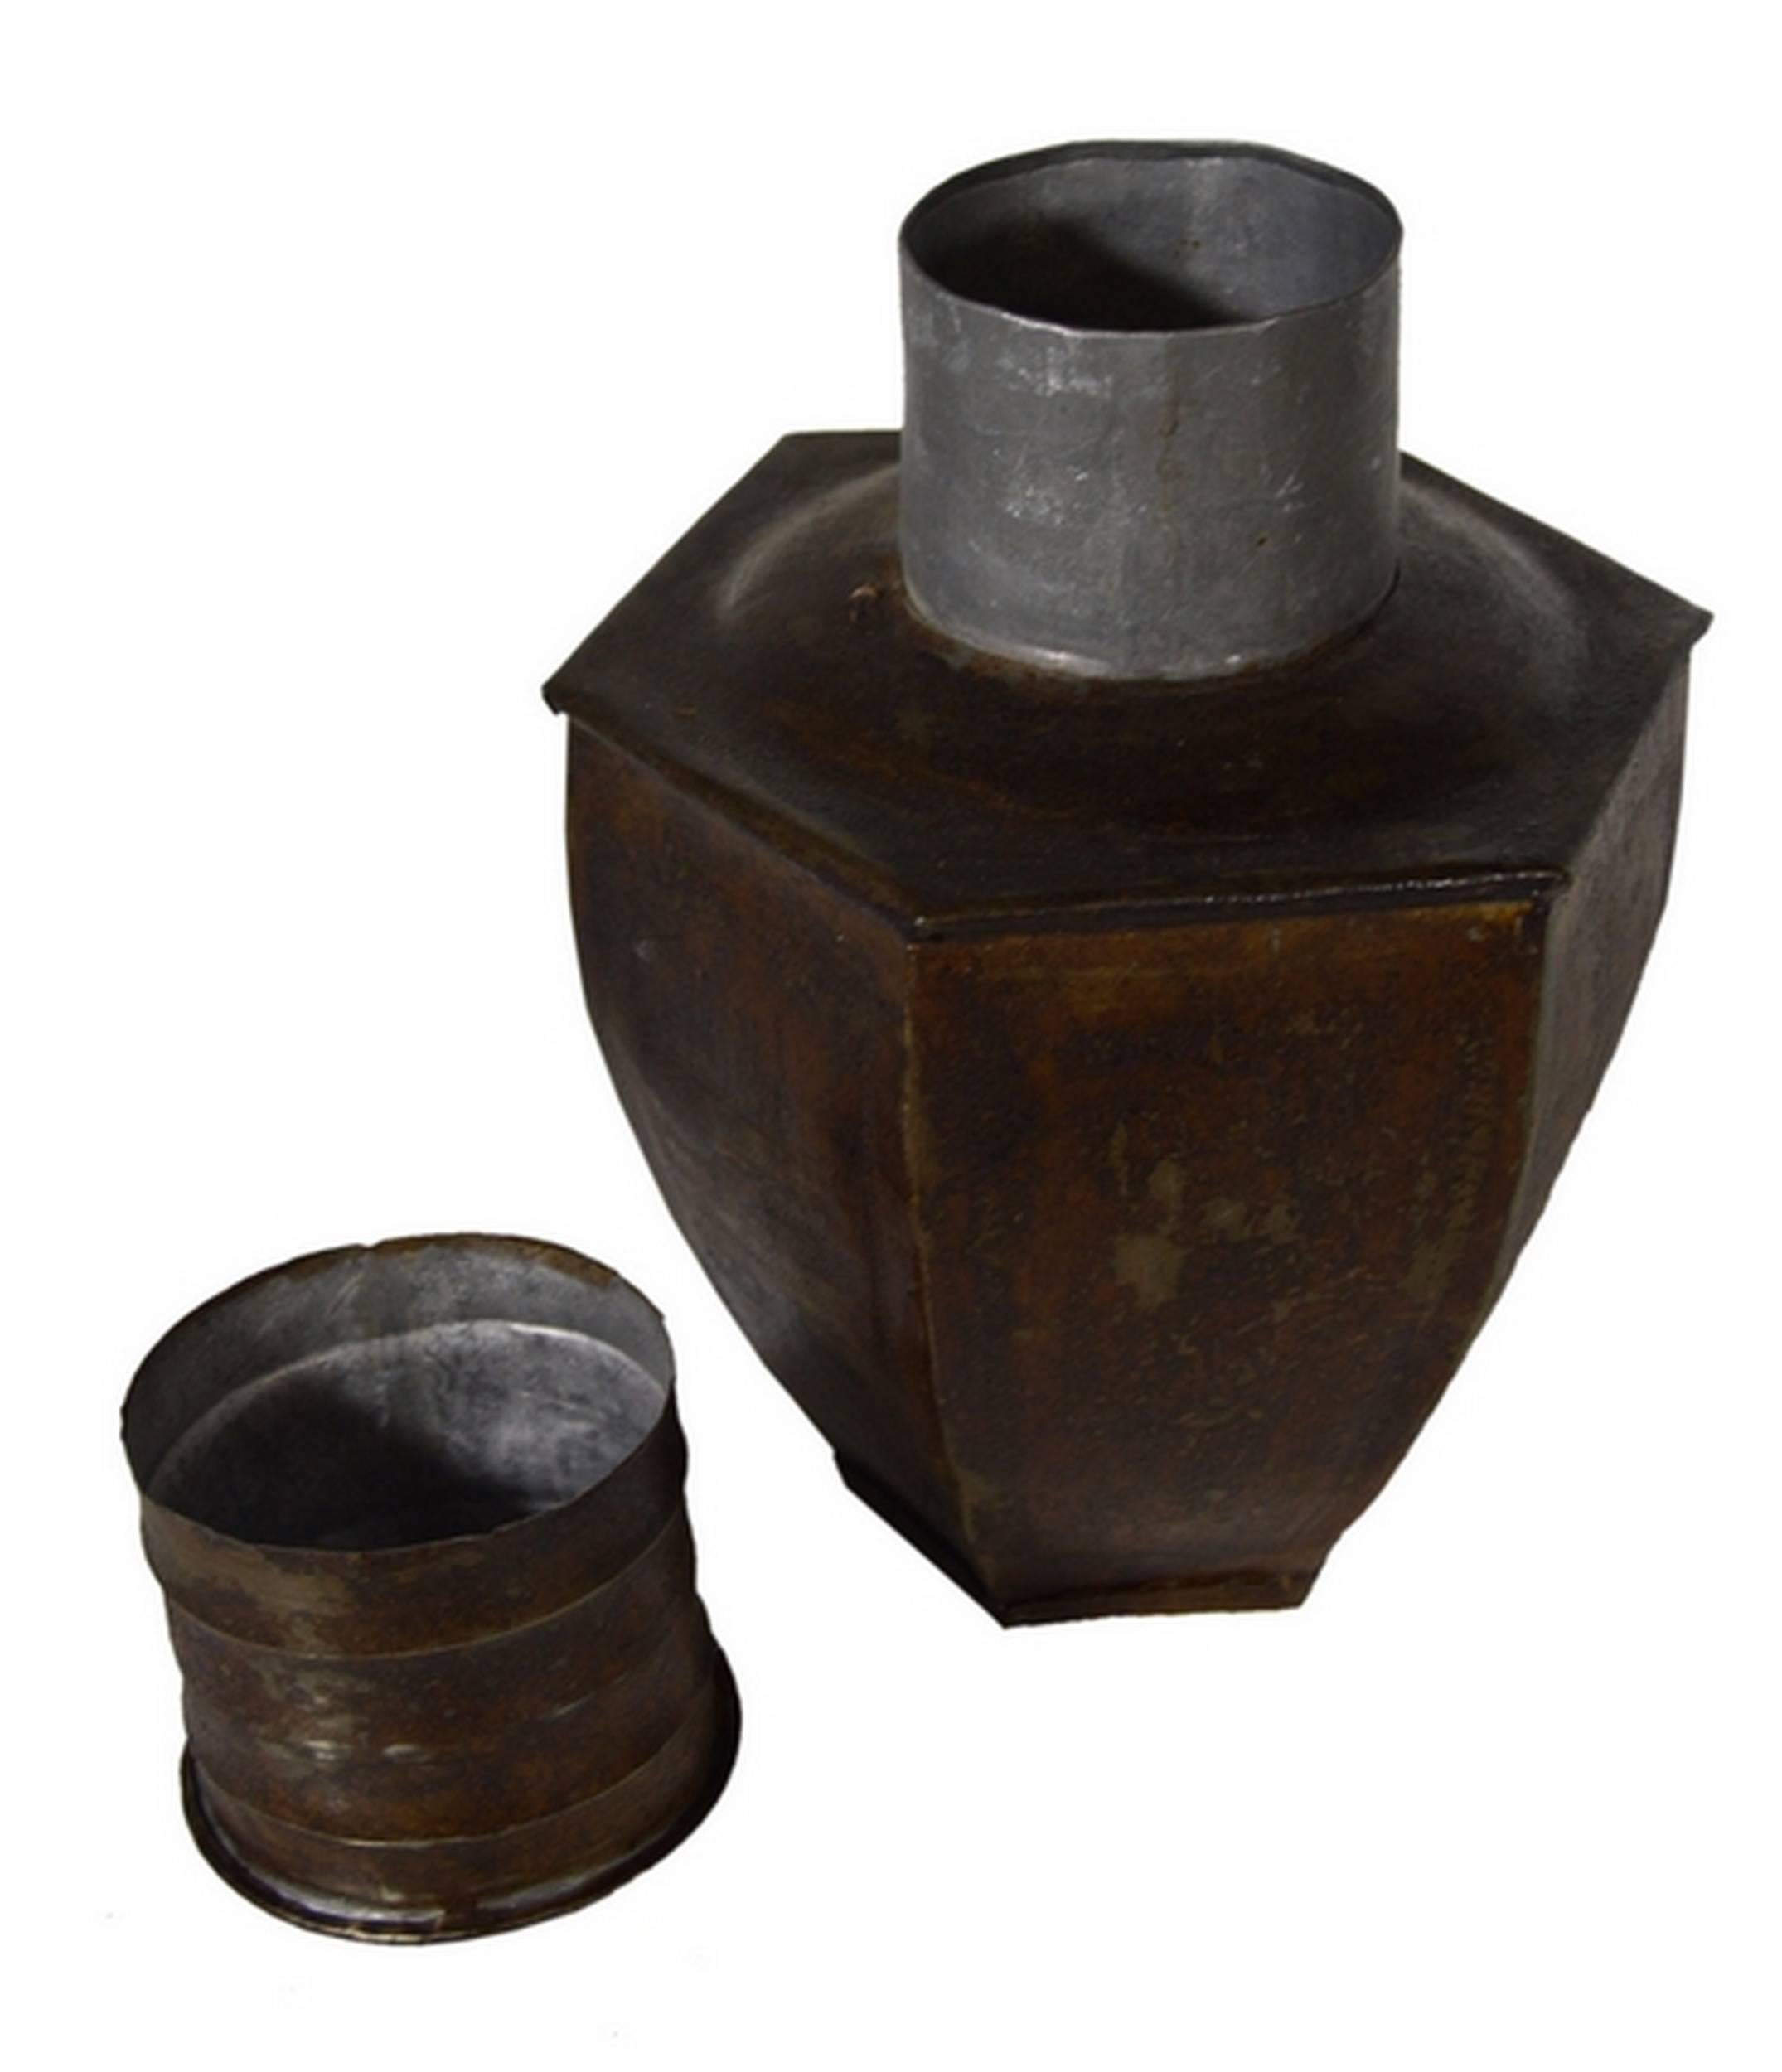 A 1930s multi-sided storage canister hand-hammered with tin in India. This canister displays a six sides shape with a narrow bottom and a large belly. The flat top features a cylindrical neck closing thanks to a striped cylindrical lid. This